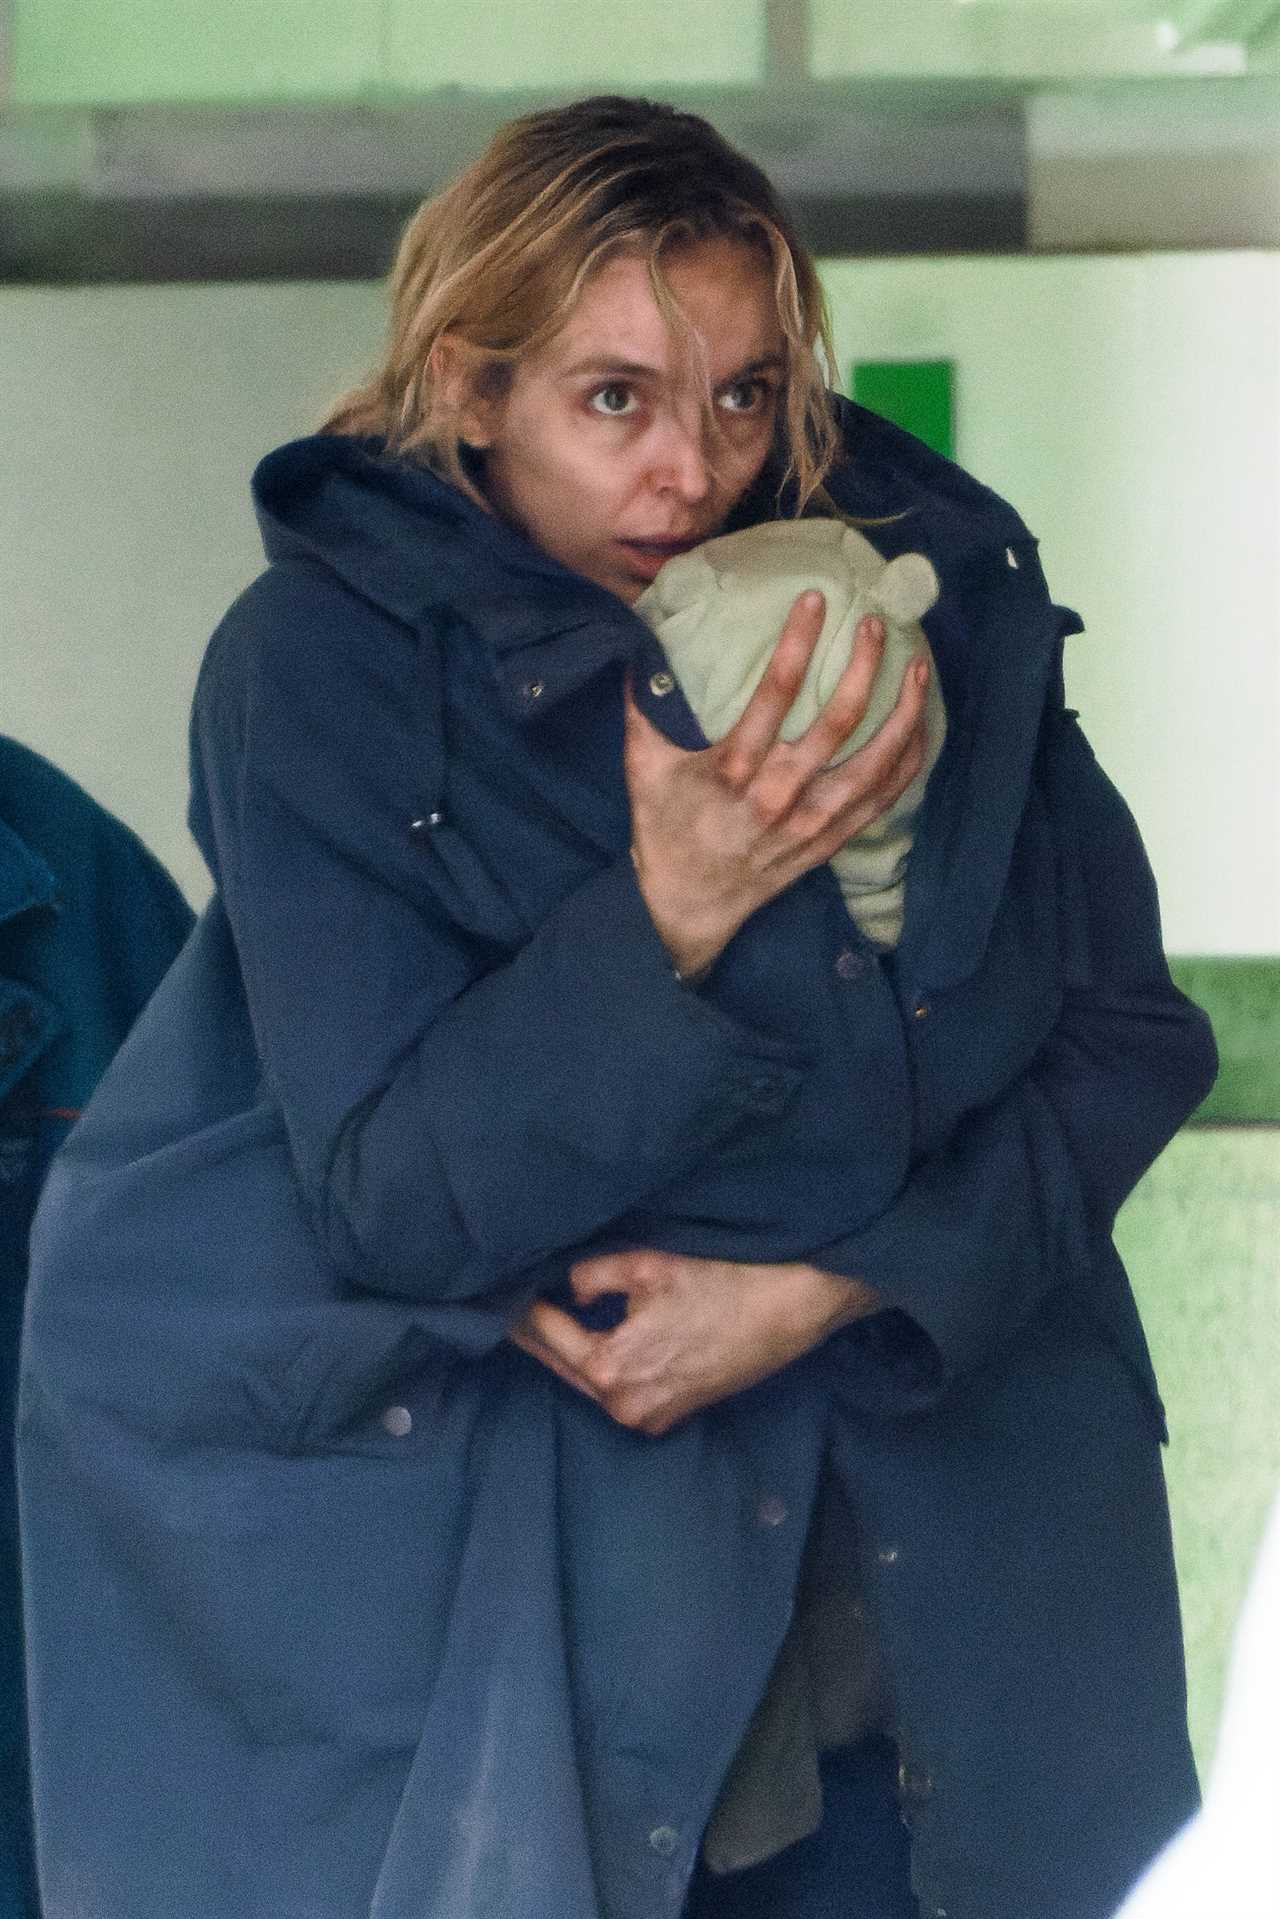 Killing Eve’s Jodie Comer films new disaster movie scenes on London rooftop